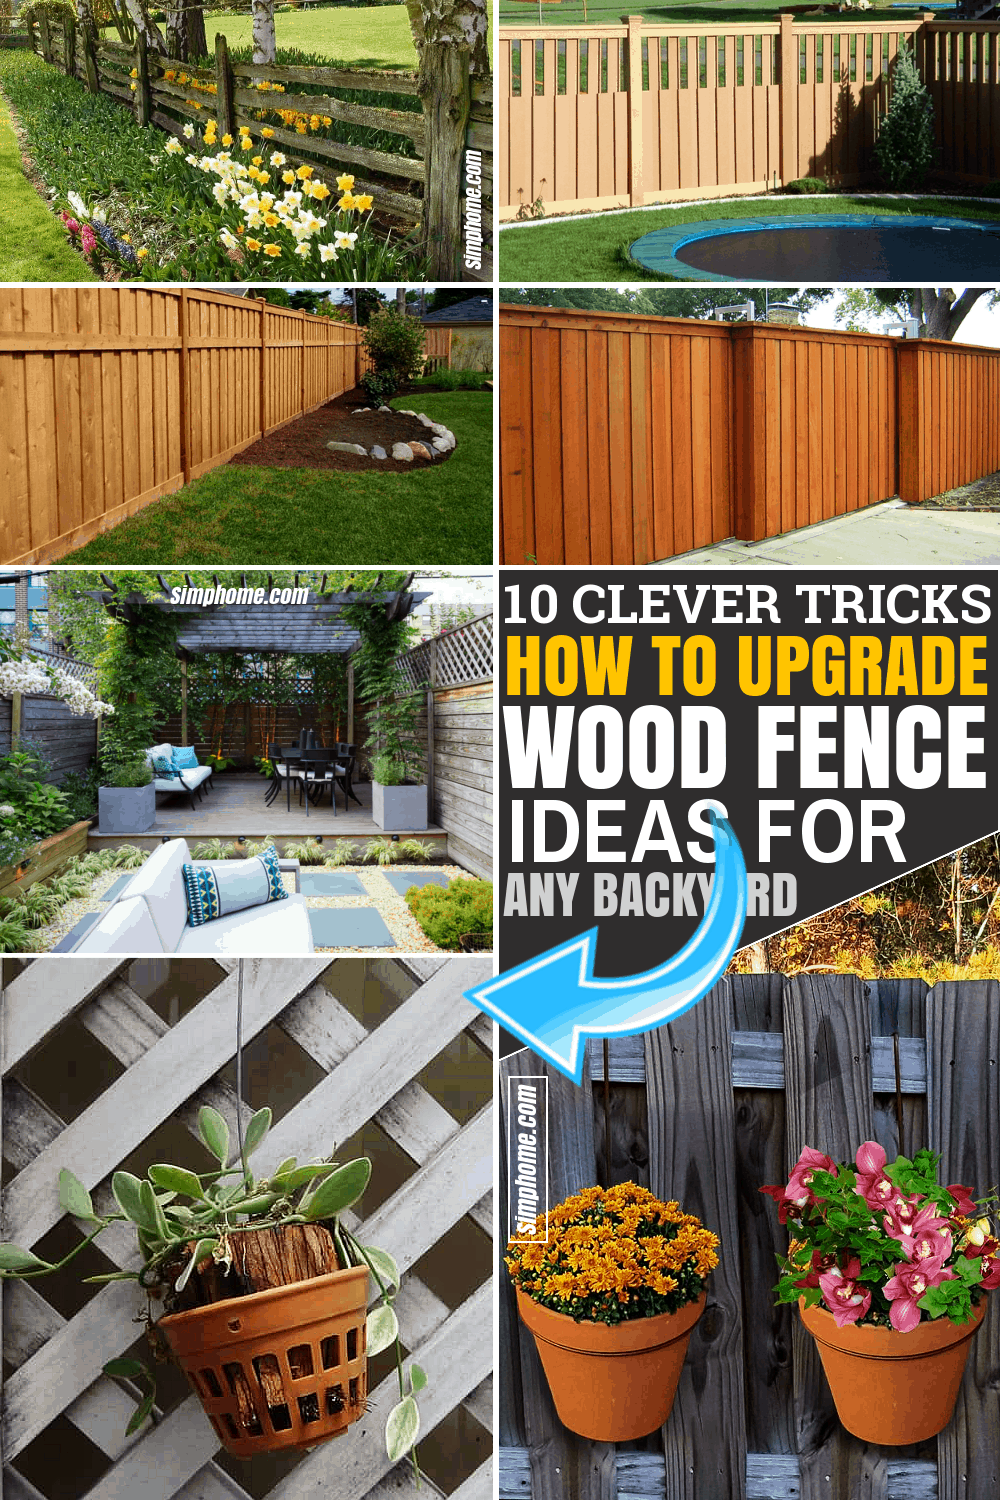 SIMPHOME.COM 10 Tricks How to Upgrade Wood Fence Ideas for Backyard Featured Pinterest